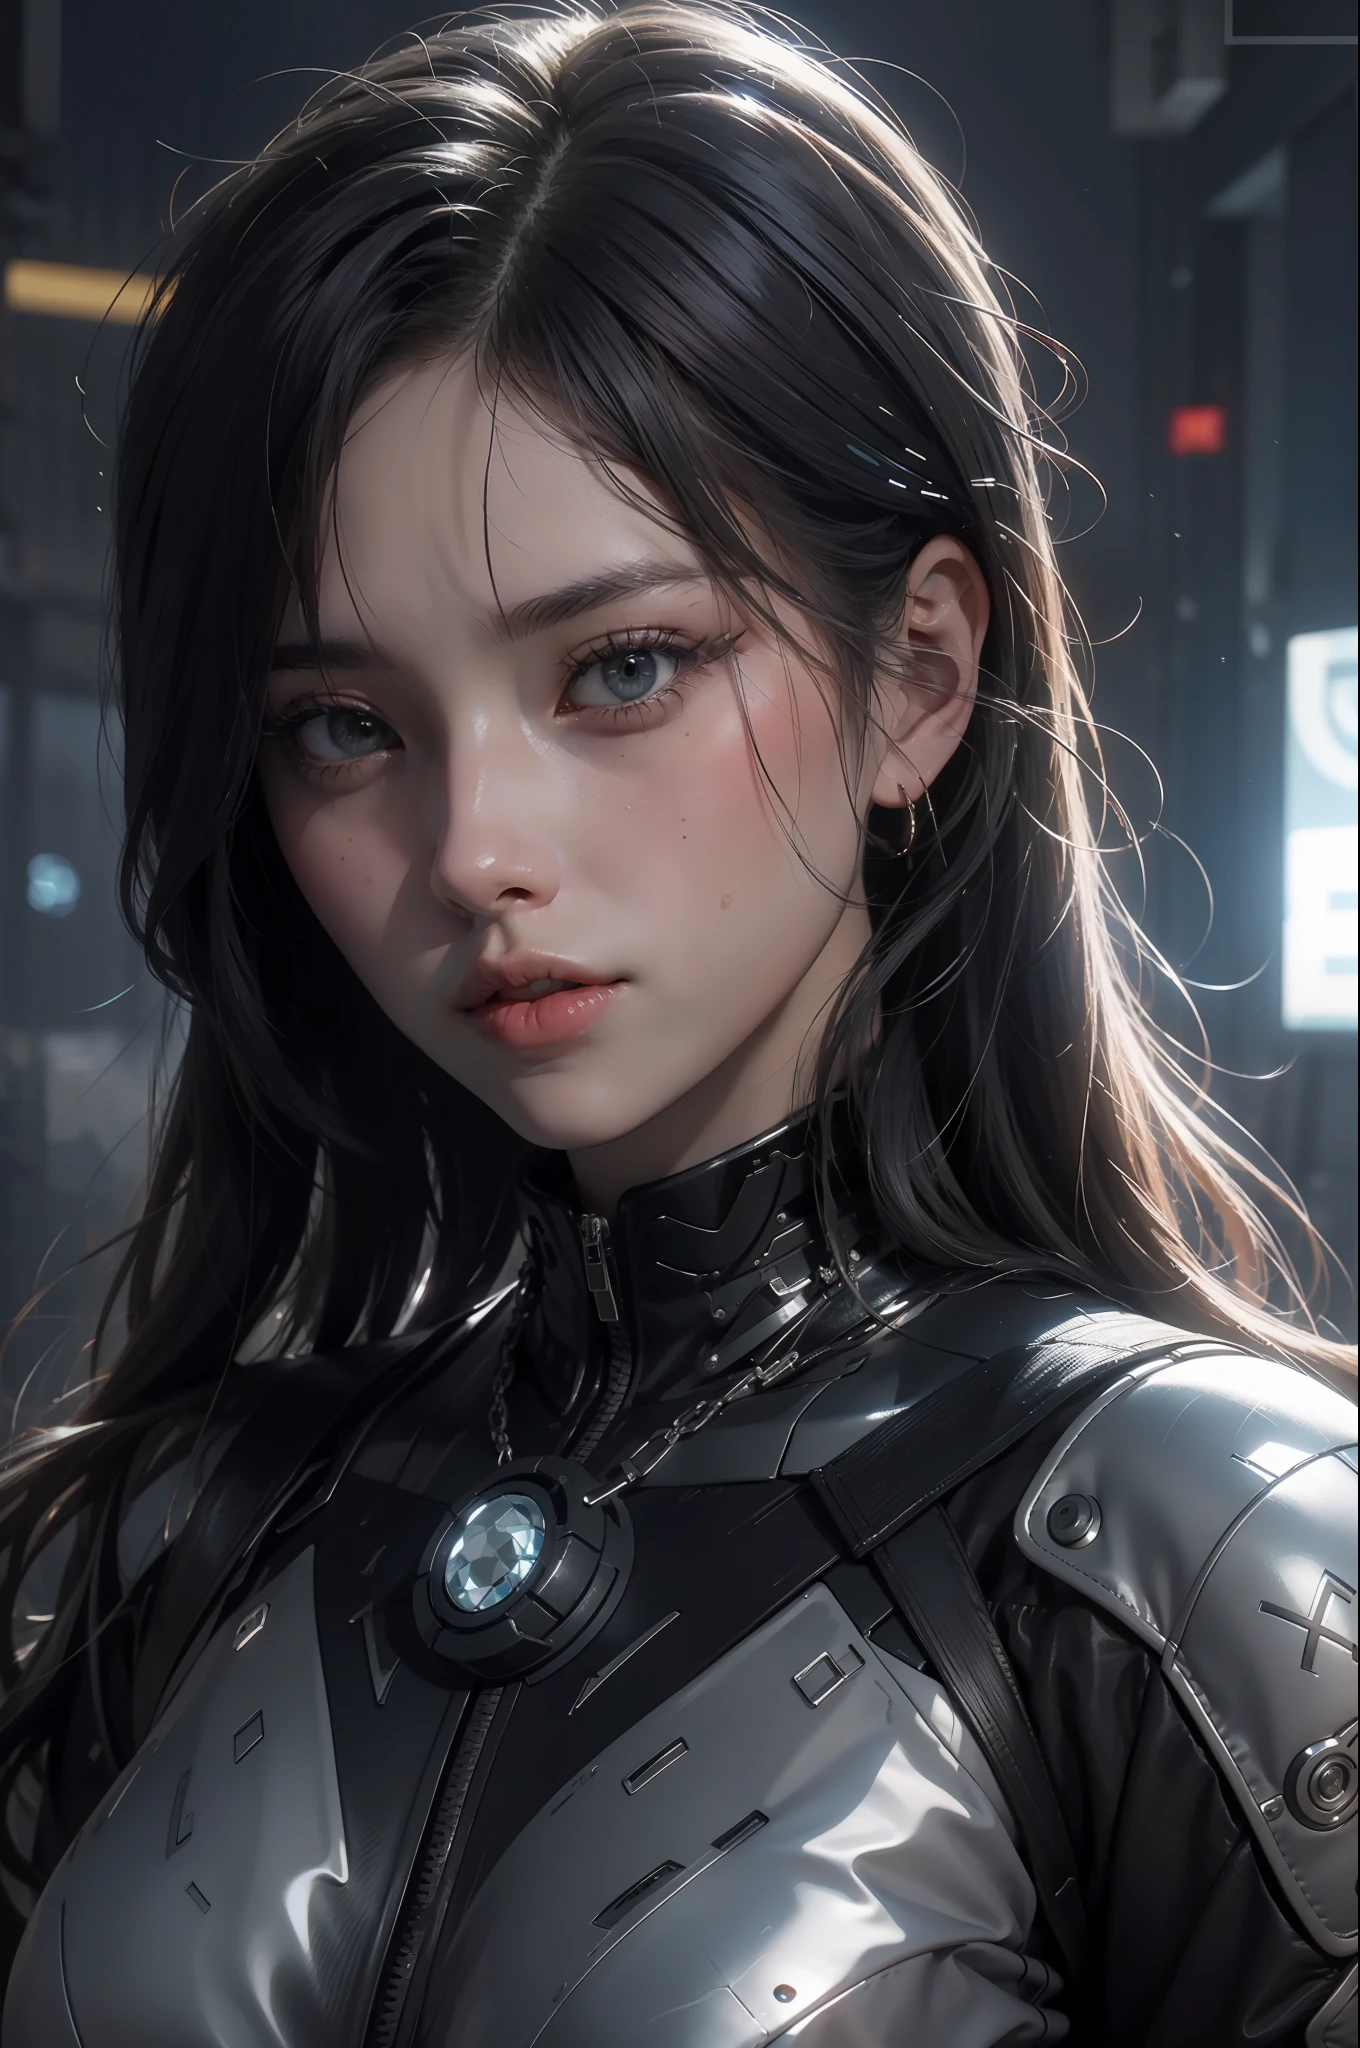 Unity 8k Wallpaper，((best qualtiy)), ((tmasterpiece)), (the detail:1.4), 3d, A beautiful cyberpunk female image,hdr（HighDynamicRange）,Ray traching,nvidia RTX,Hyper-Resolution,Unreal 5,Subsurface scattering、PBR Texture、post-proces、Anisotropy Filtering、depth of fieldaximum definition and sharpnesany-Layer Textures、Albedo and Specular maps、Surface coloring、Accurate simulation of light-material interactions、perfectly proportions、rendering by octane、Two-colored light、largeaperture、Low ISO、White balance、the rule of thirds、8K raw data、（Pat the upper body，closeup of face）